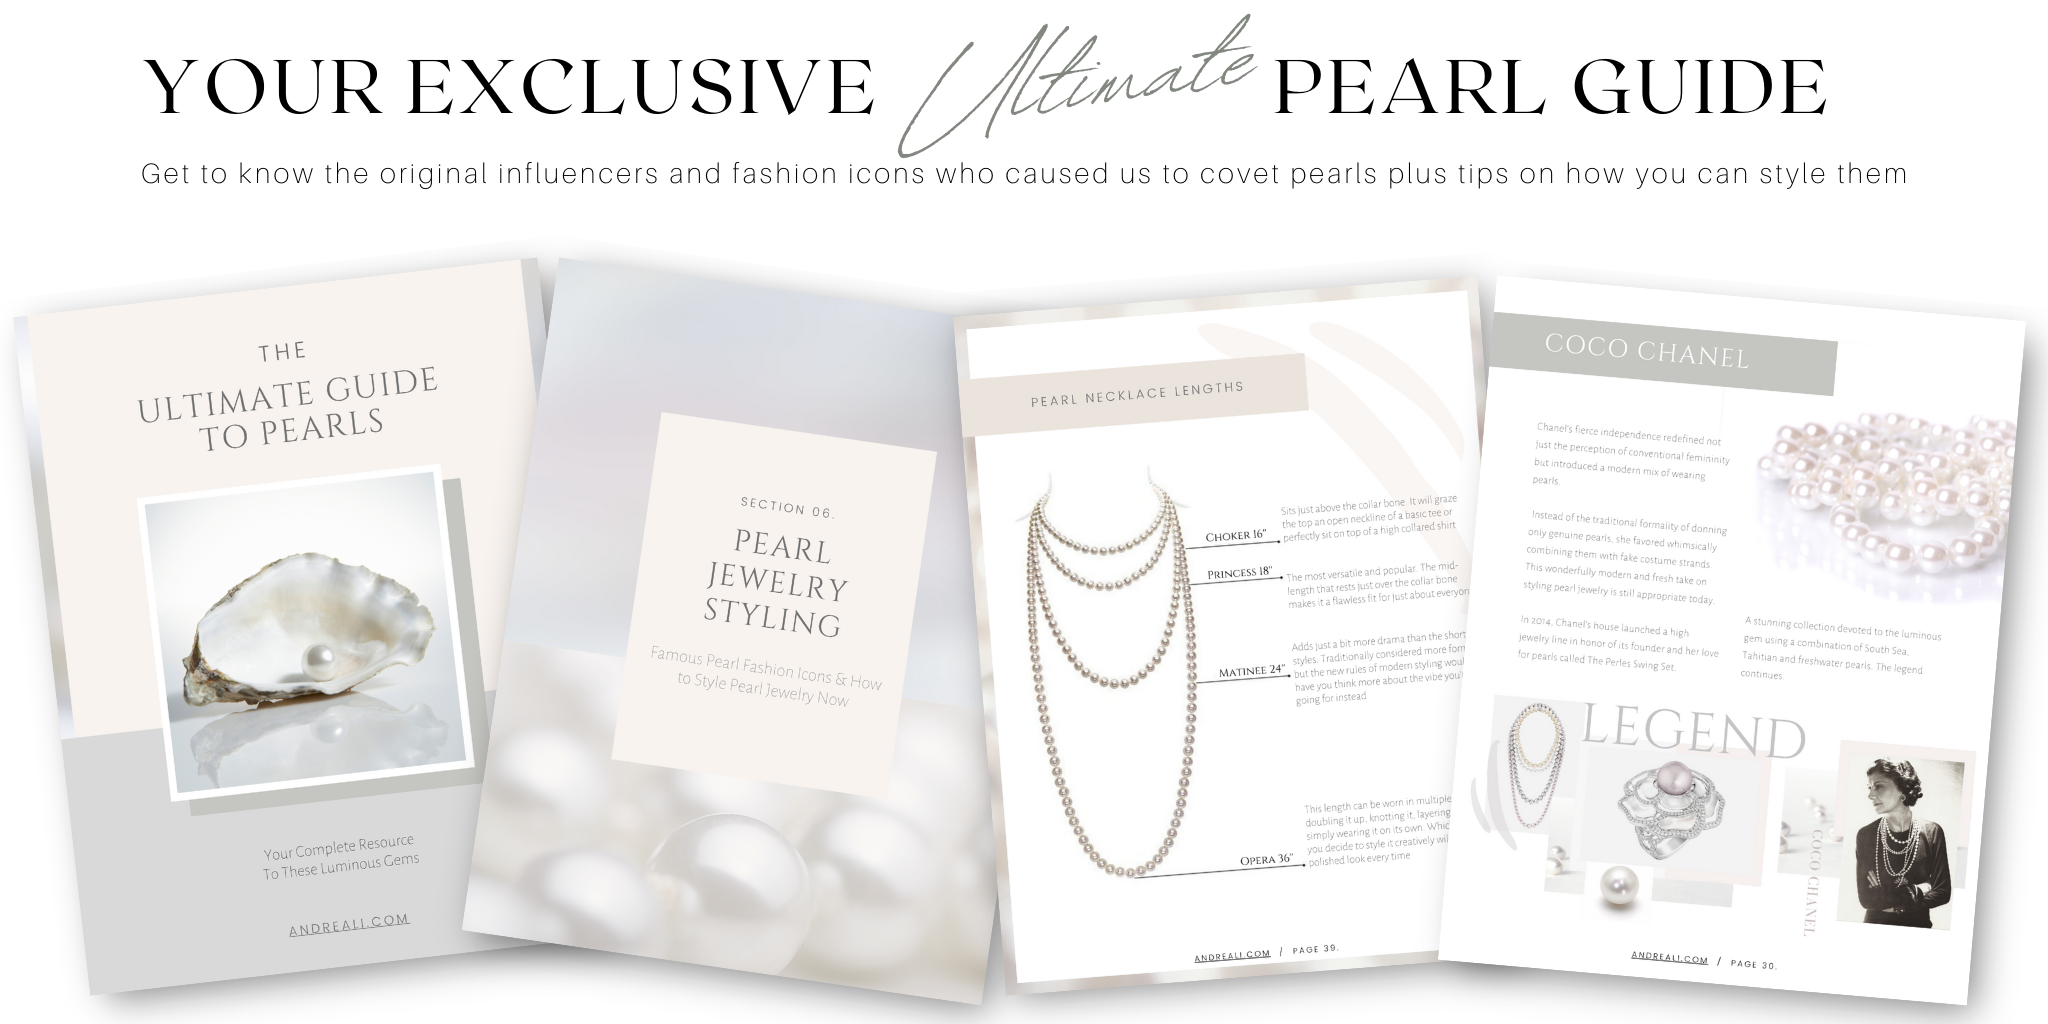 Famous Pearl Fashion Icons To Inspire How to Wear Them — ANDREA LI